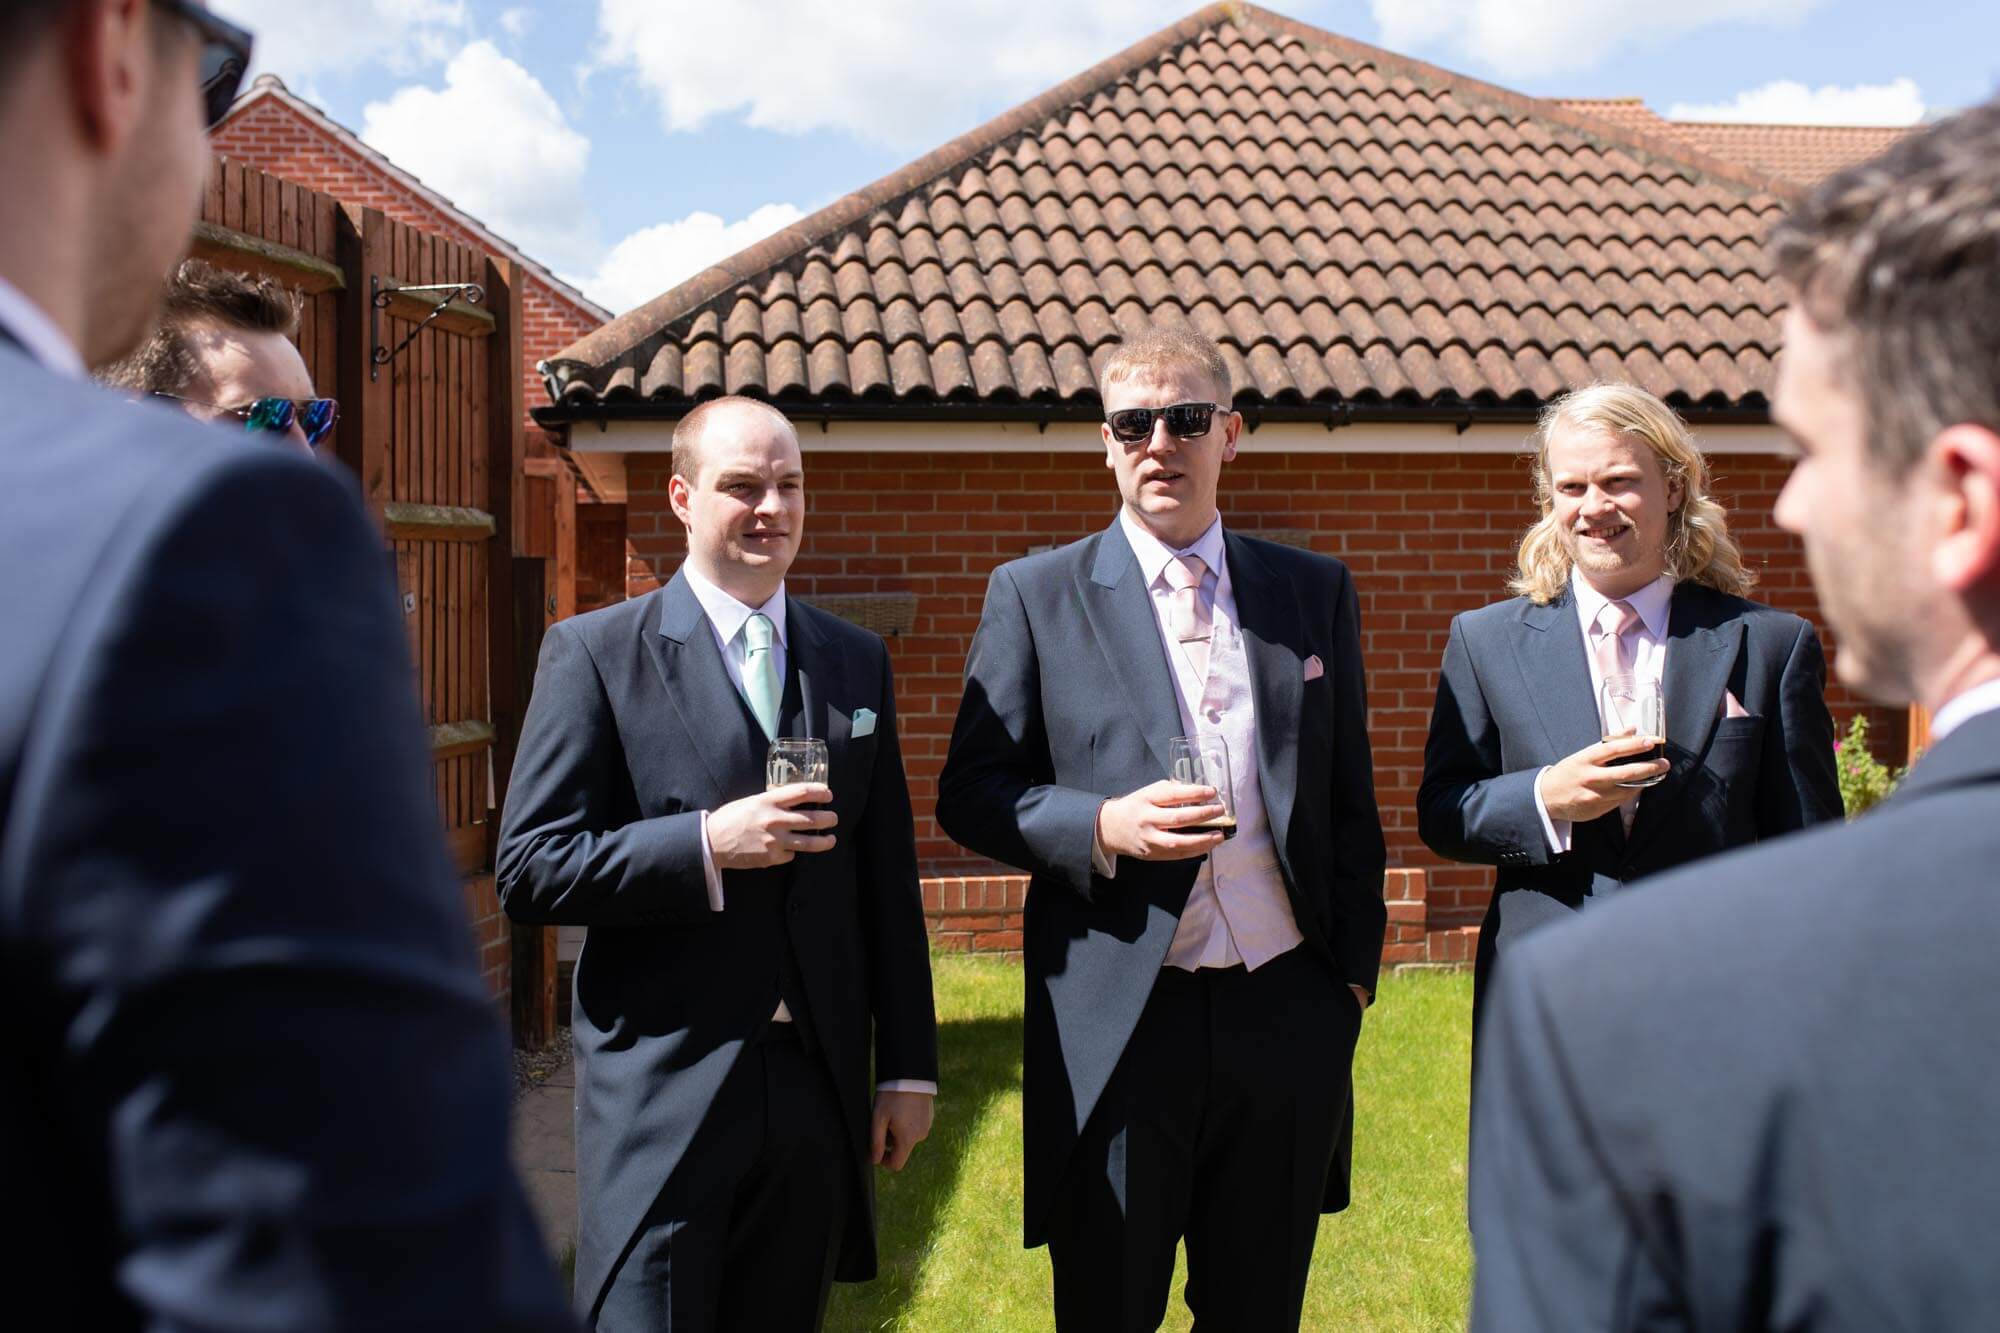 The groom and groomsmen enjoy a beer in the sunny garden before going to the wedding ceremony